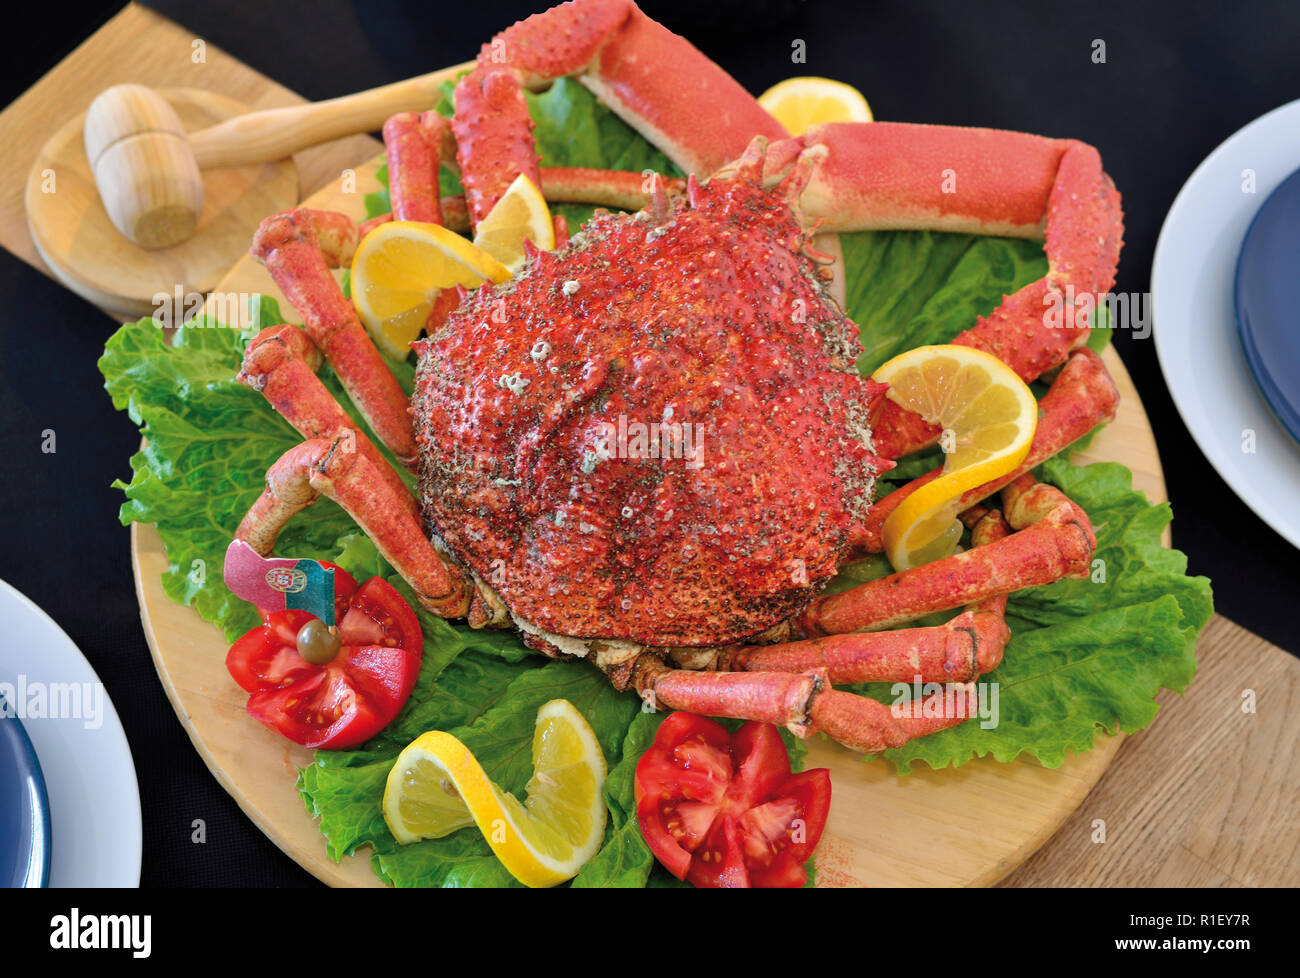 Fresh cooked spider crab on a wooden plate decorated with salad, tomatoes and lemon slices Stock Photo